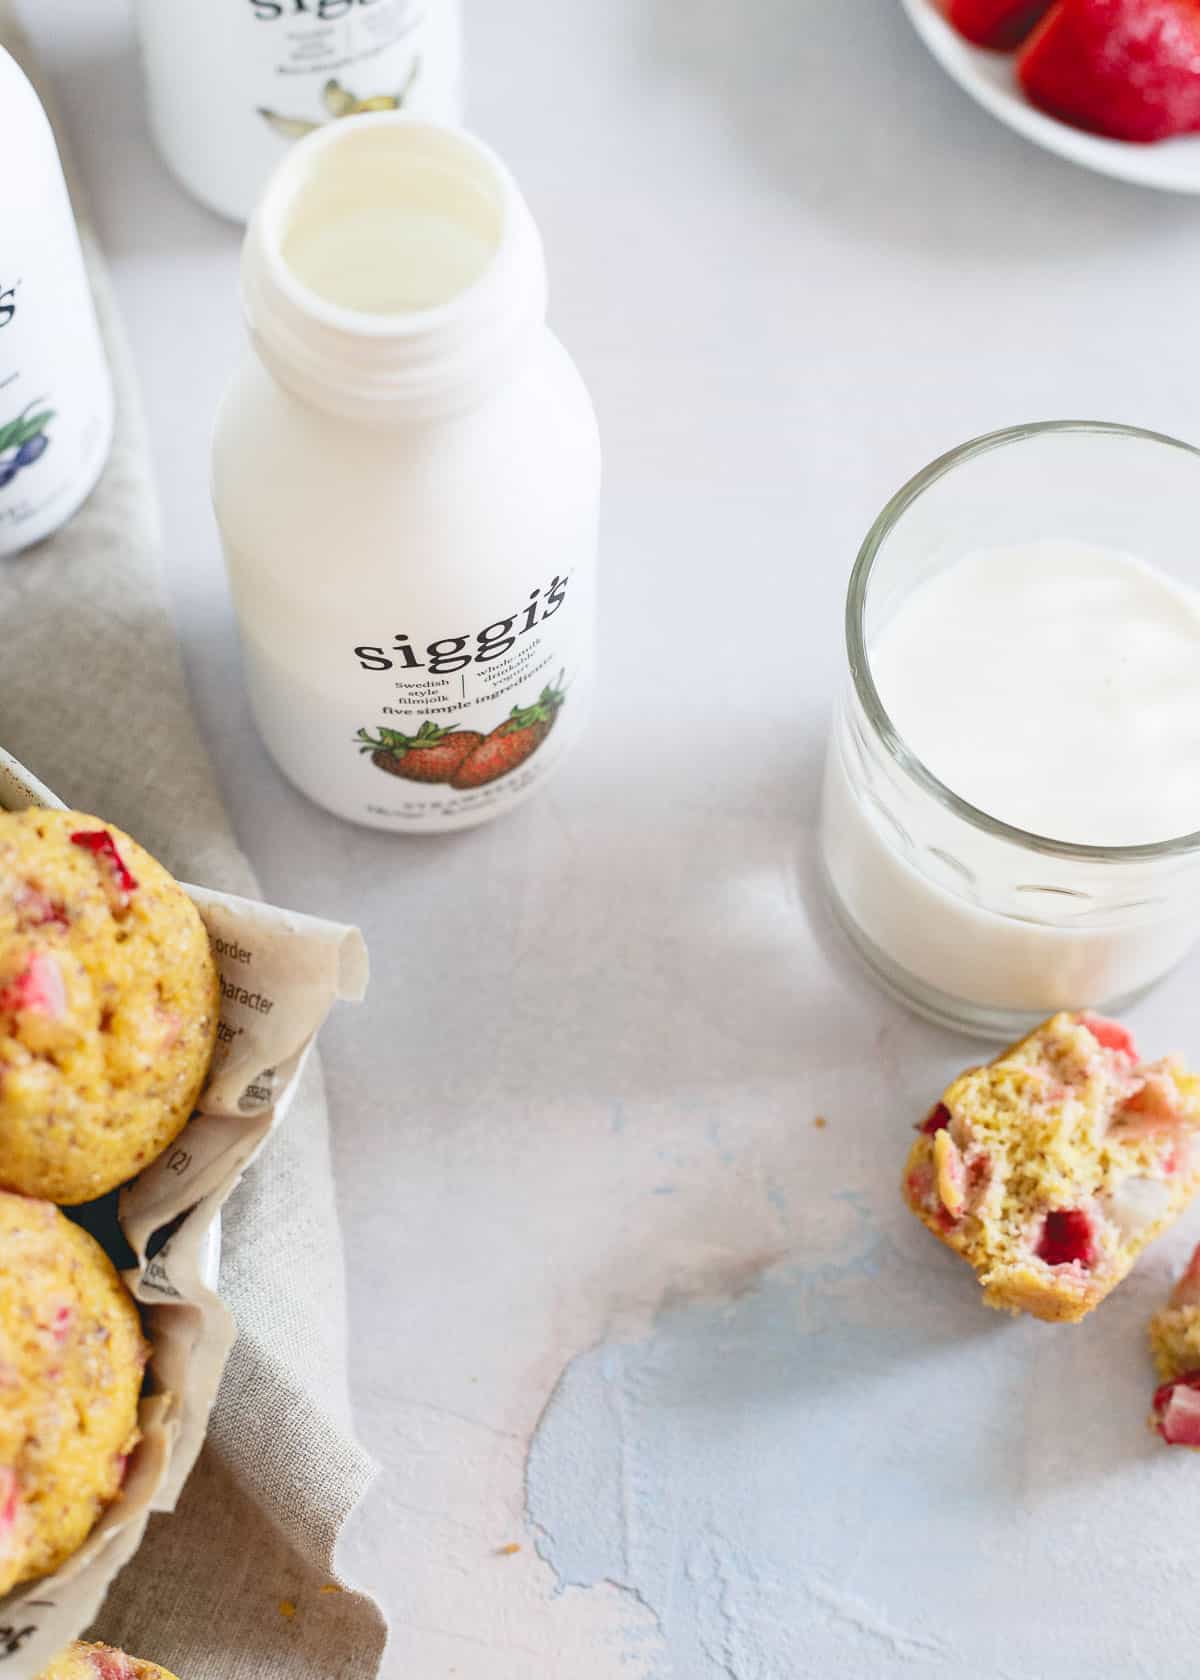 Whether you're looking for a healthy snack or a quick breakfast option, these siggi's drinkable whole milk yogurts are a perfect choice.